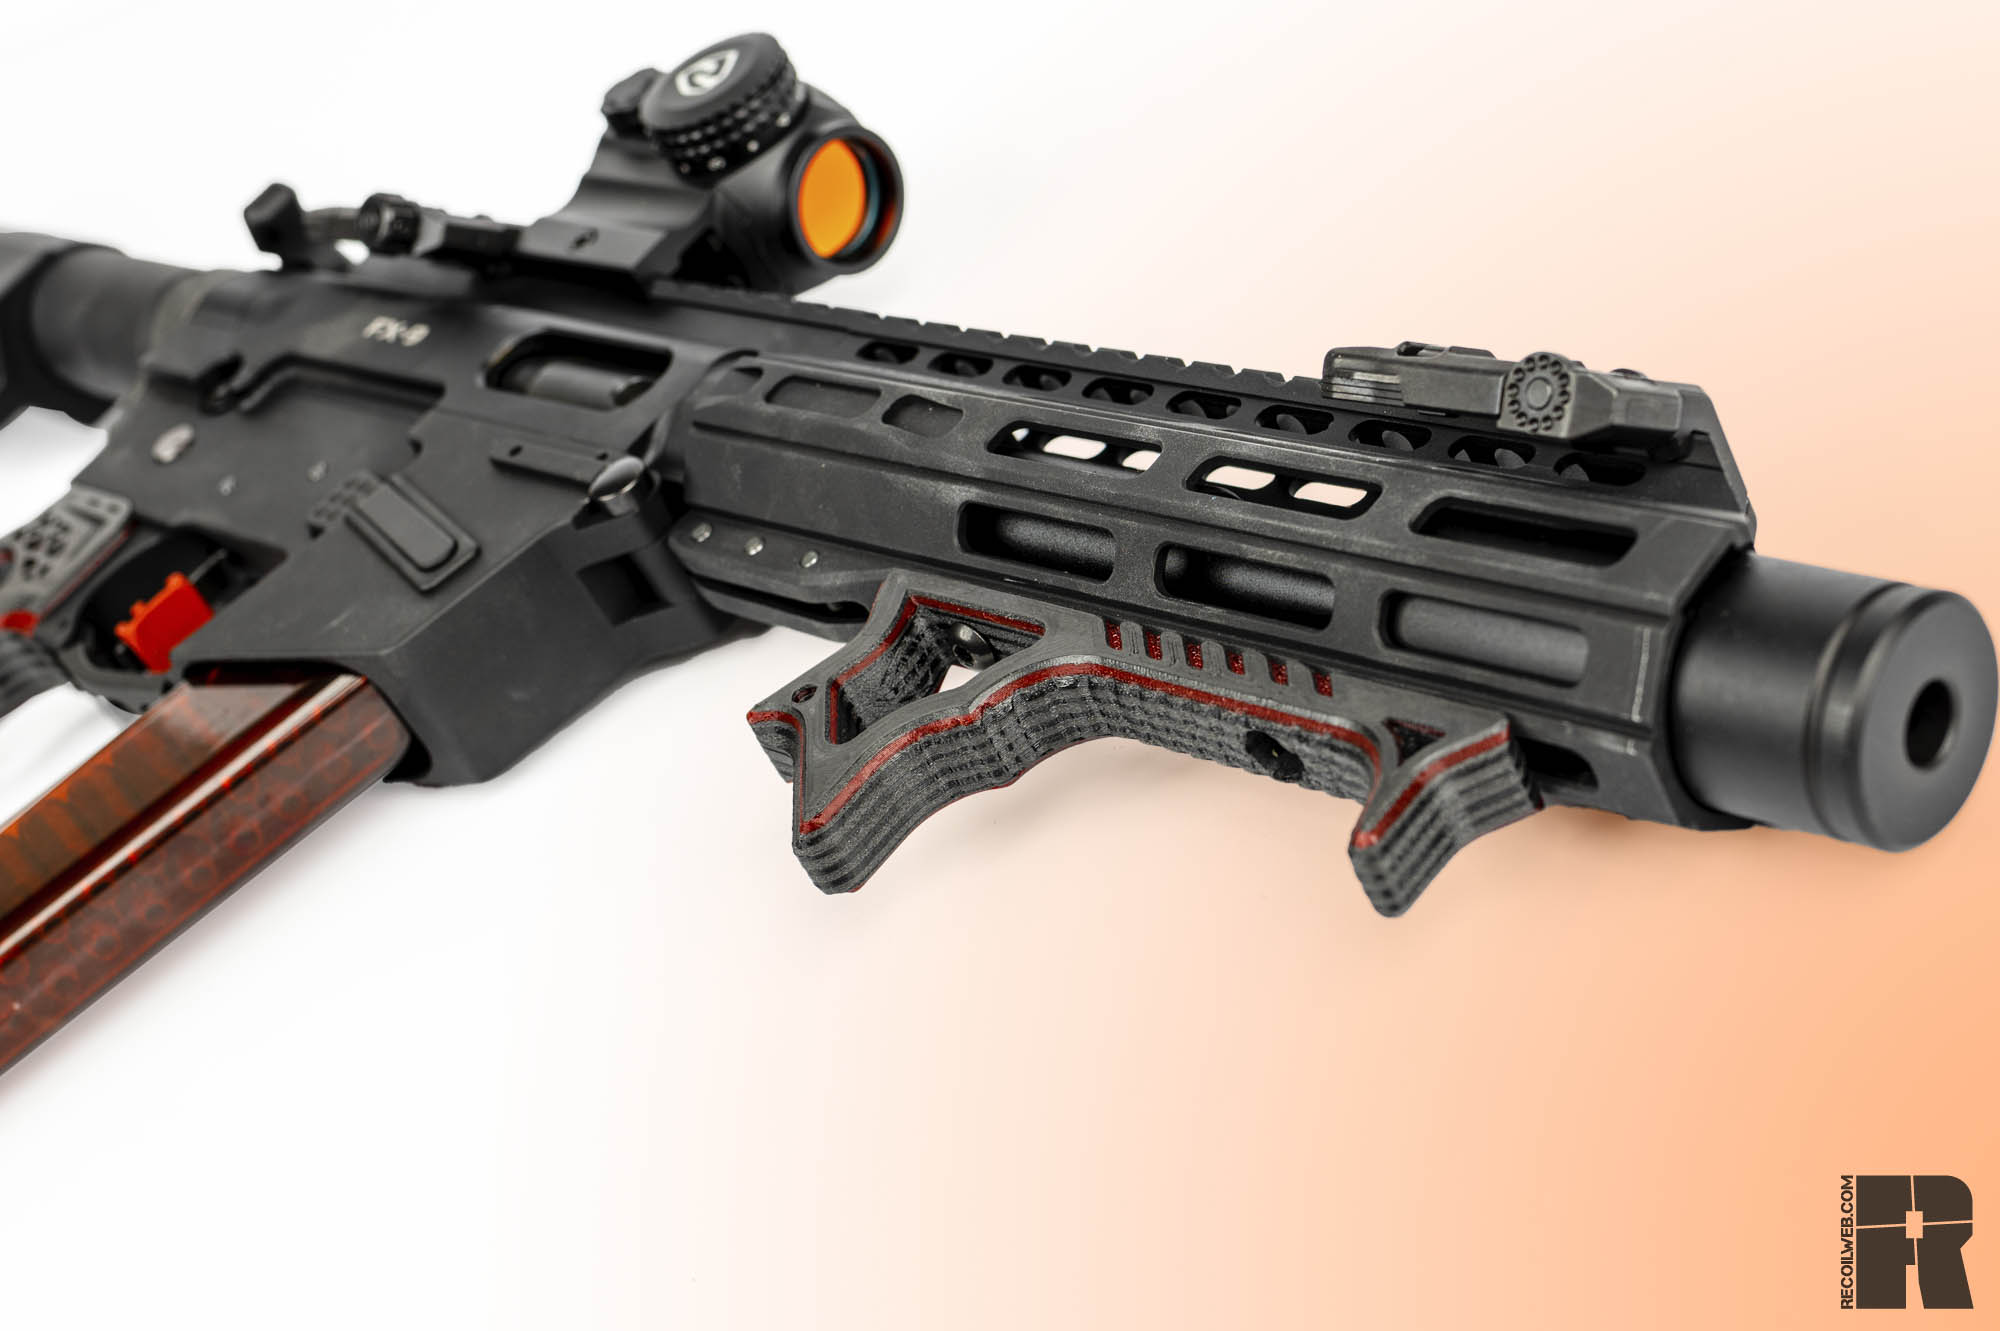 Review: Freedom Ordnance Fx-9 | Recoil